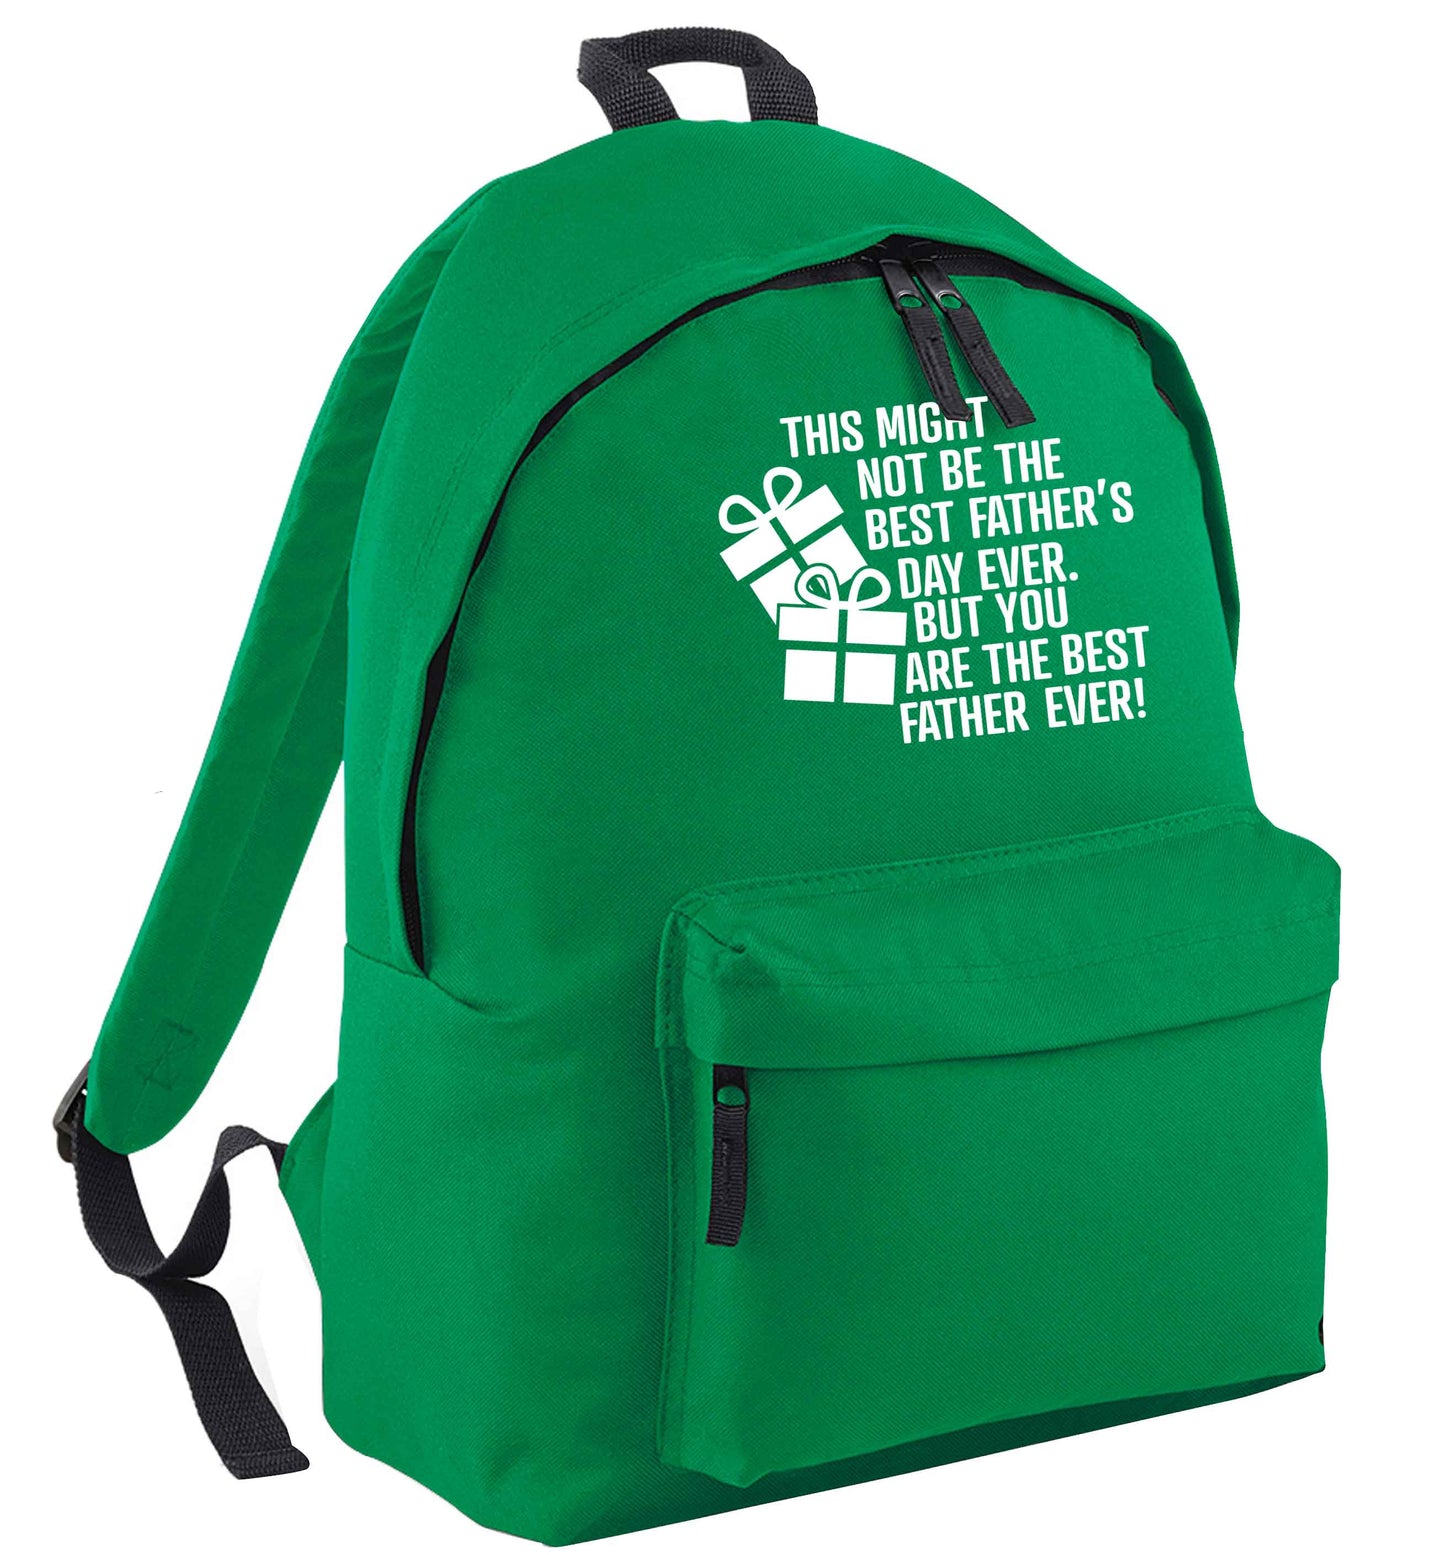 It might not be the best Father's Day ever but you are the best father ever! green adults backpack